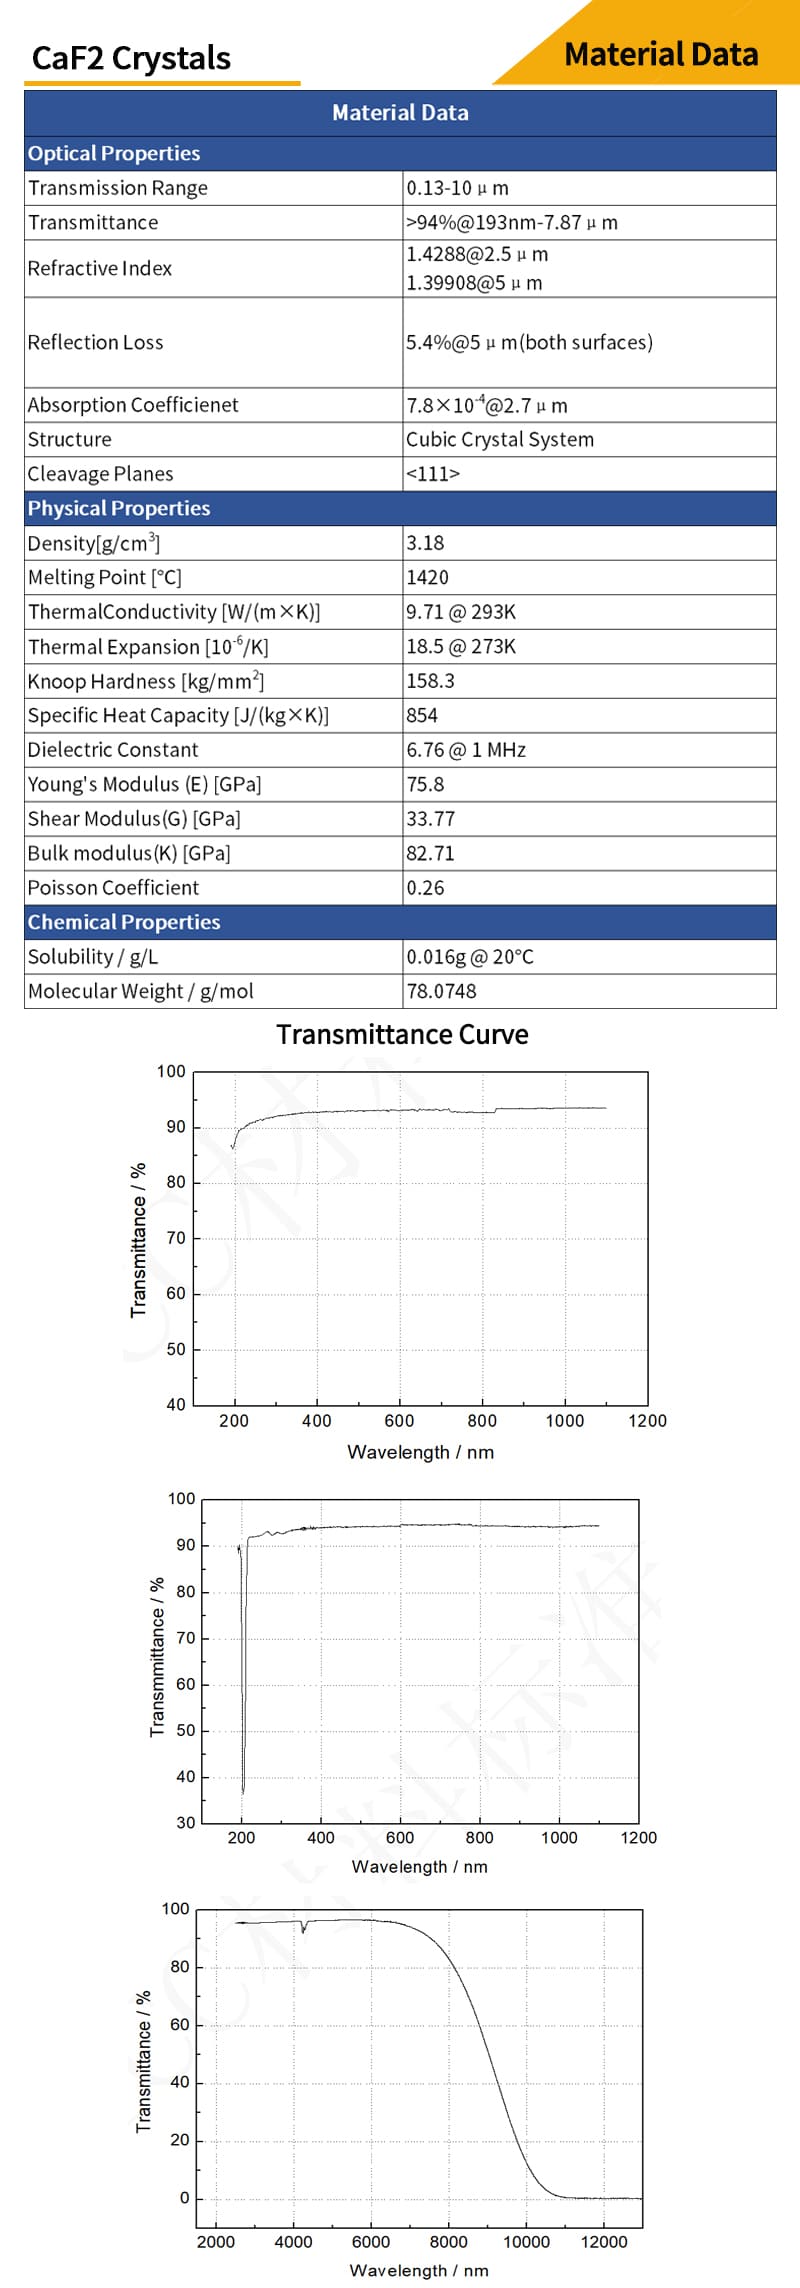 Calcium Fluoride rectangular drilled  window material data and transmittance curves